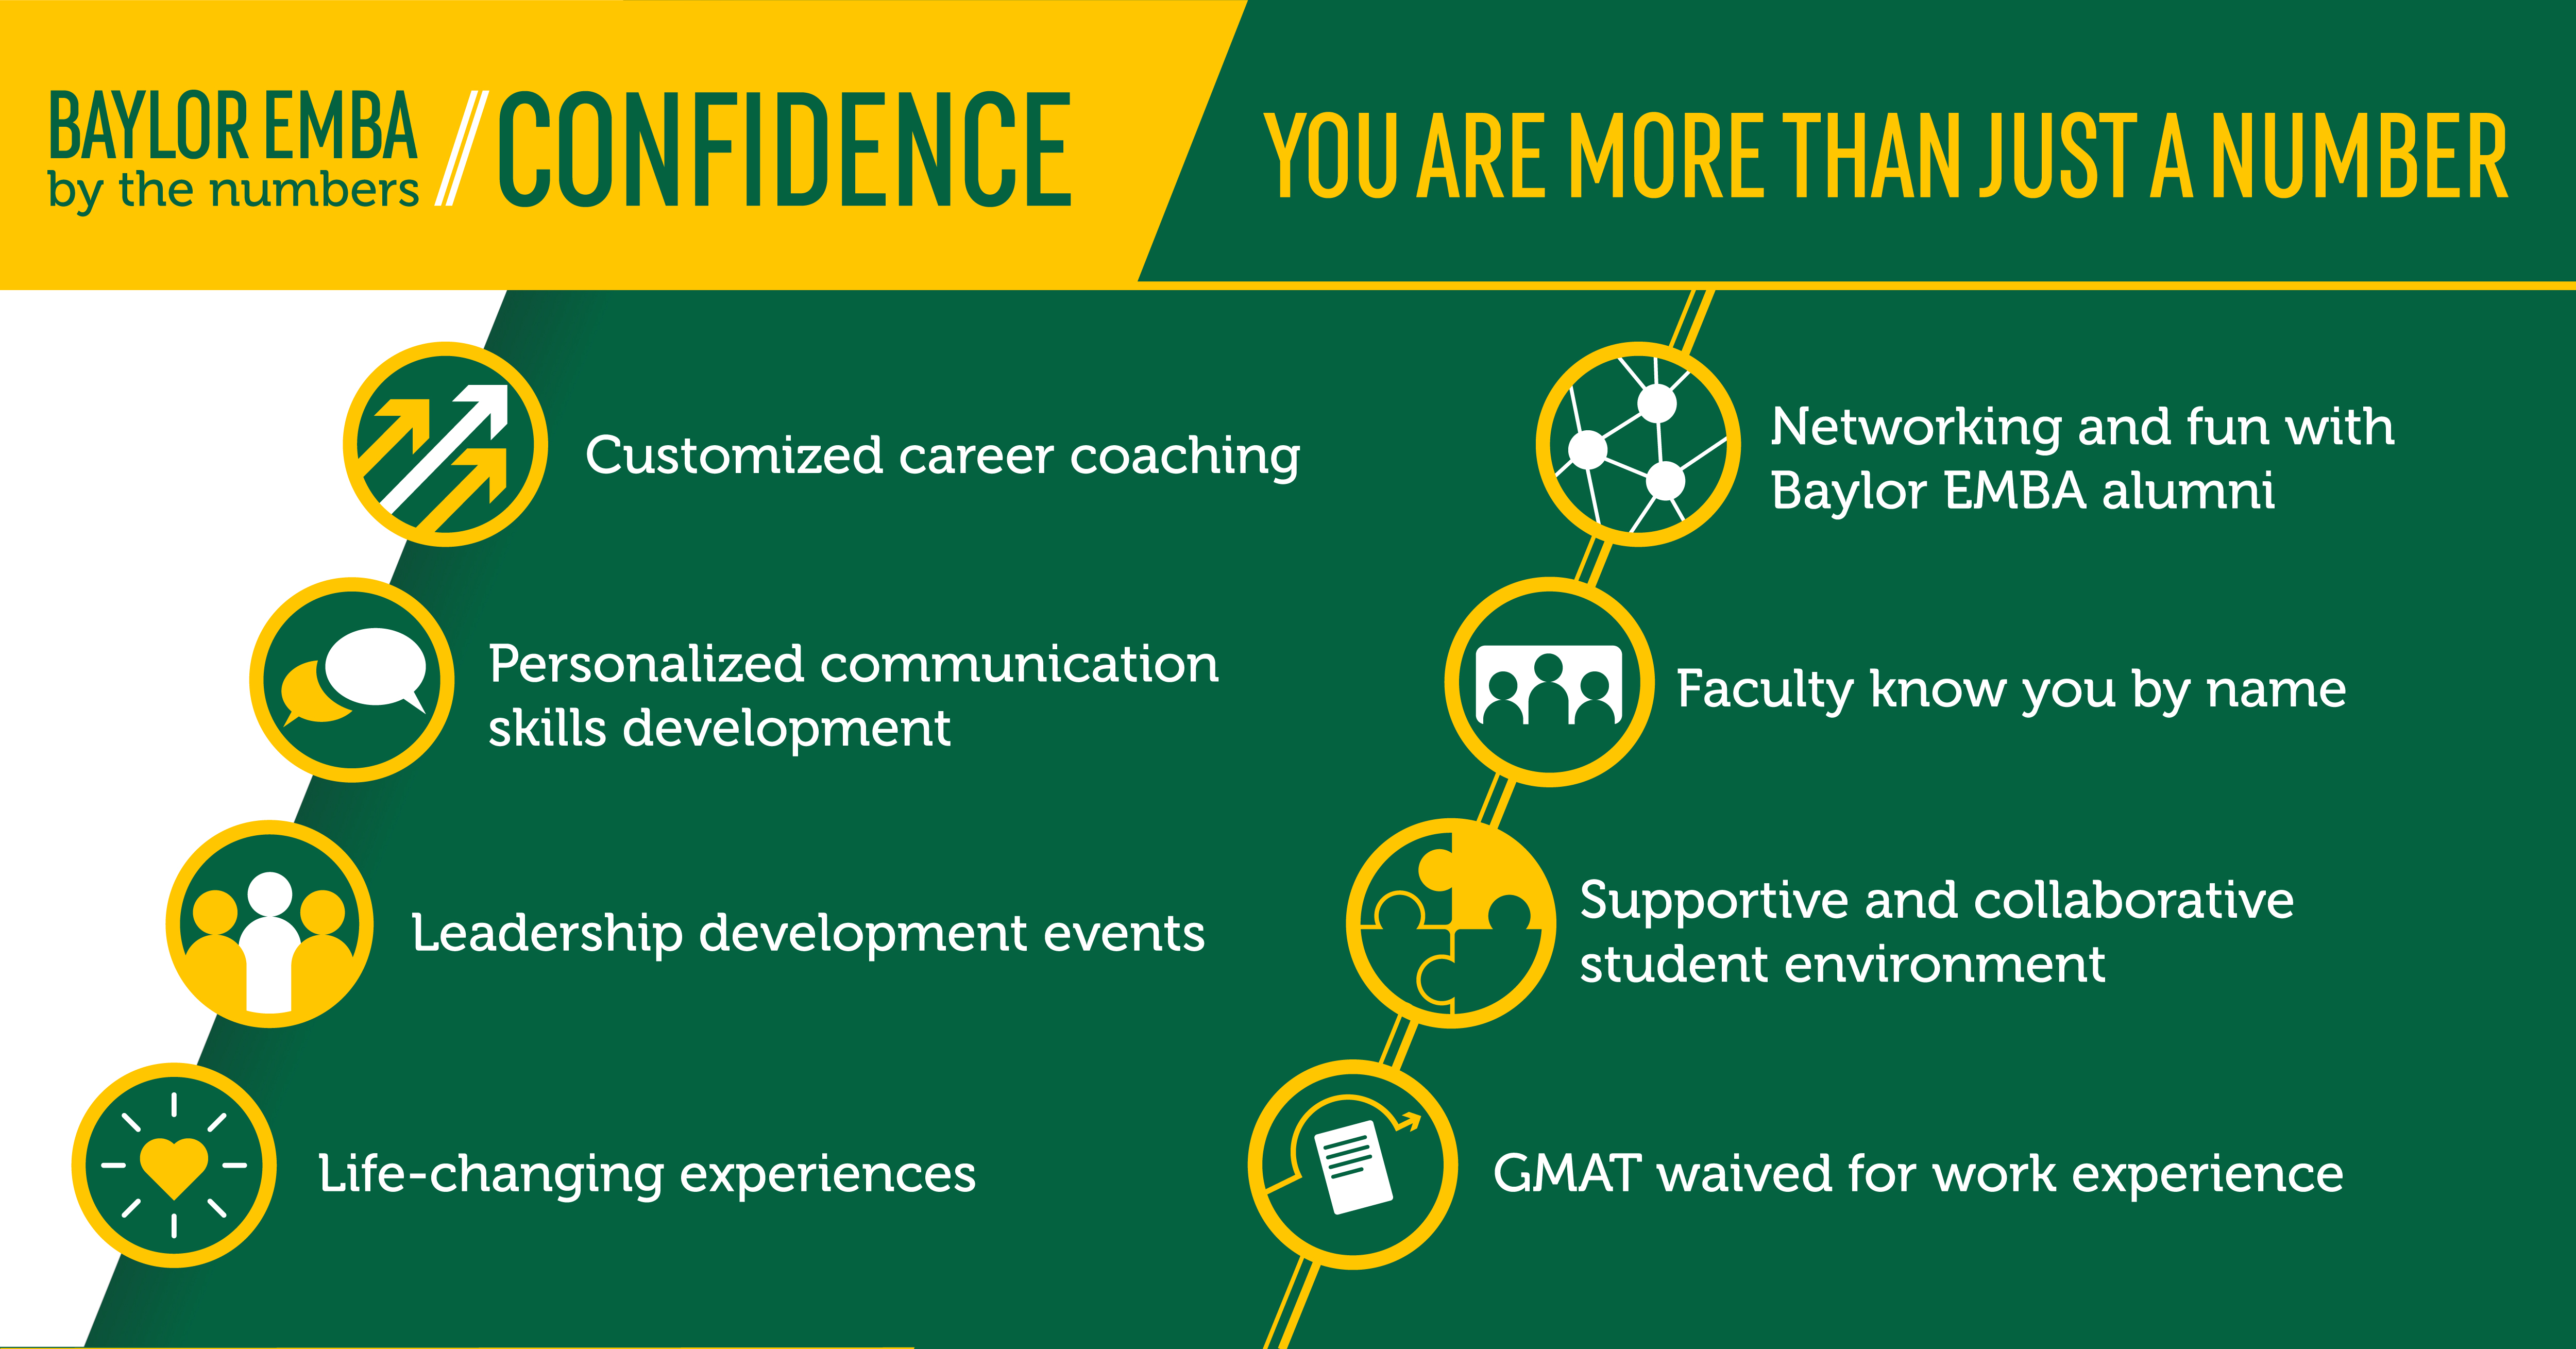 DEMBA Student Support Infographic: You Are More Than Just a Number